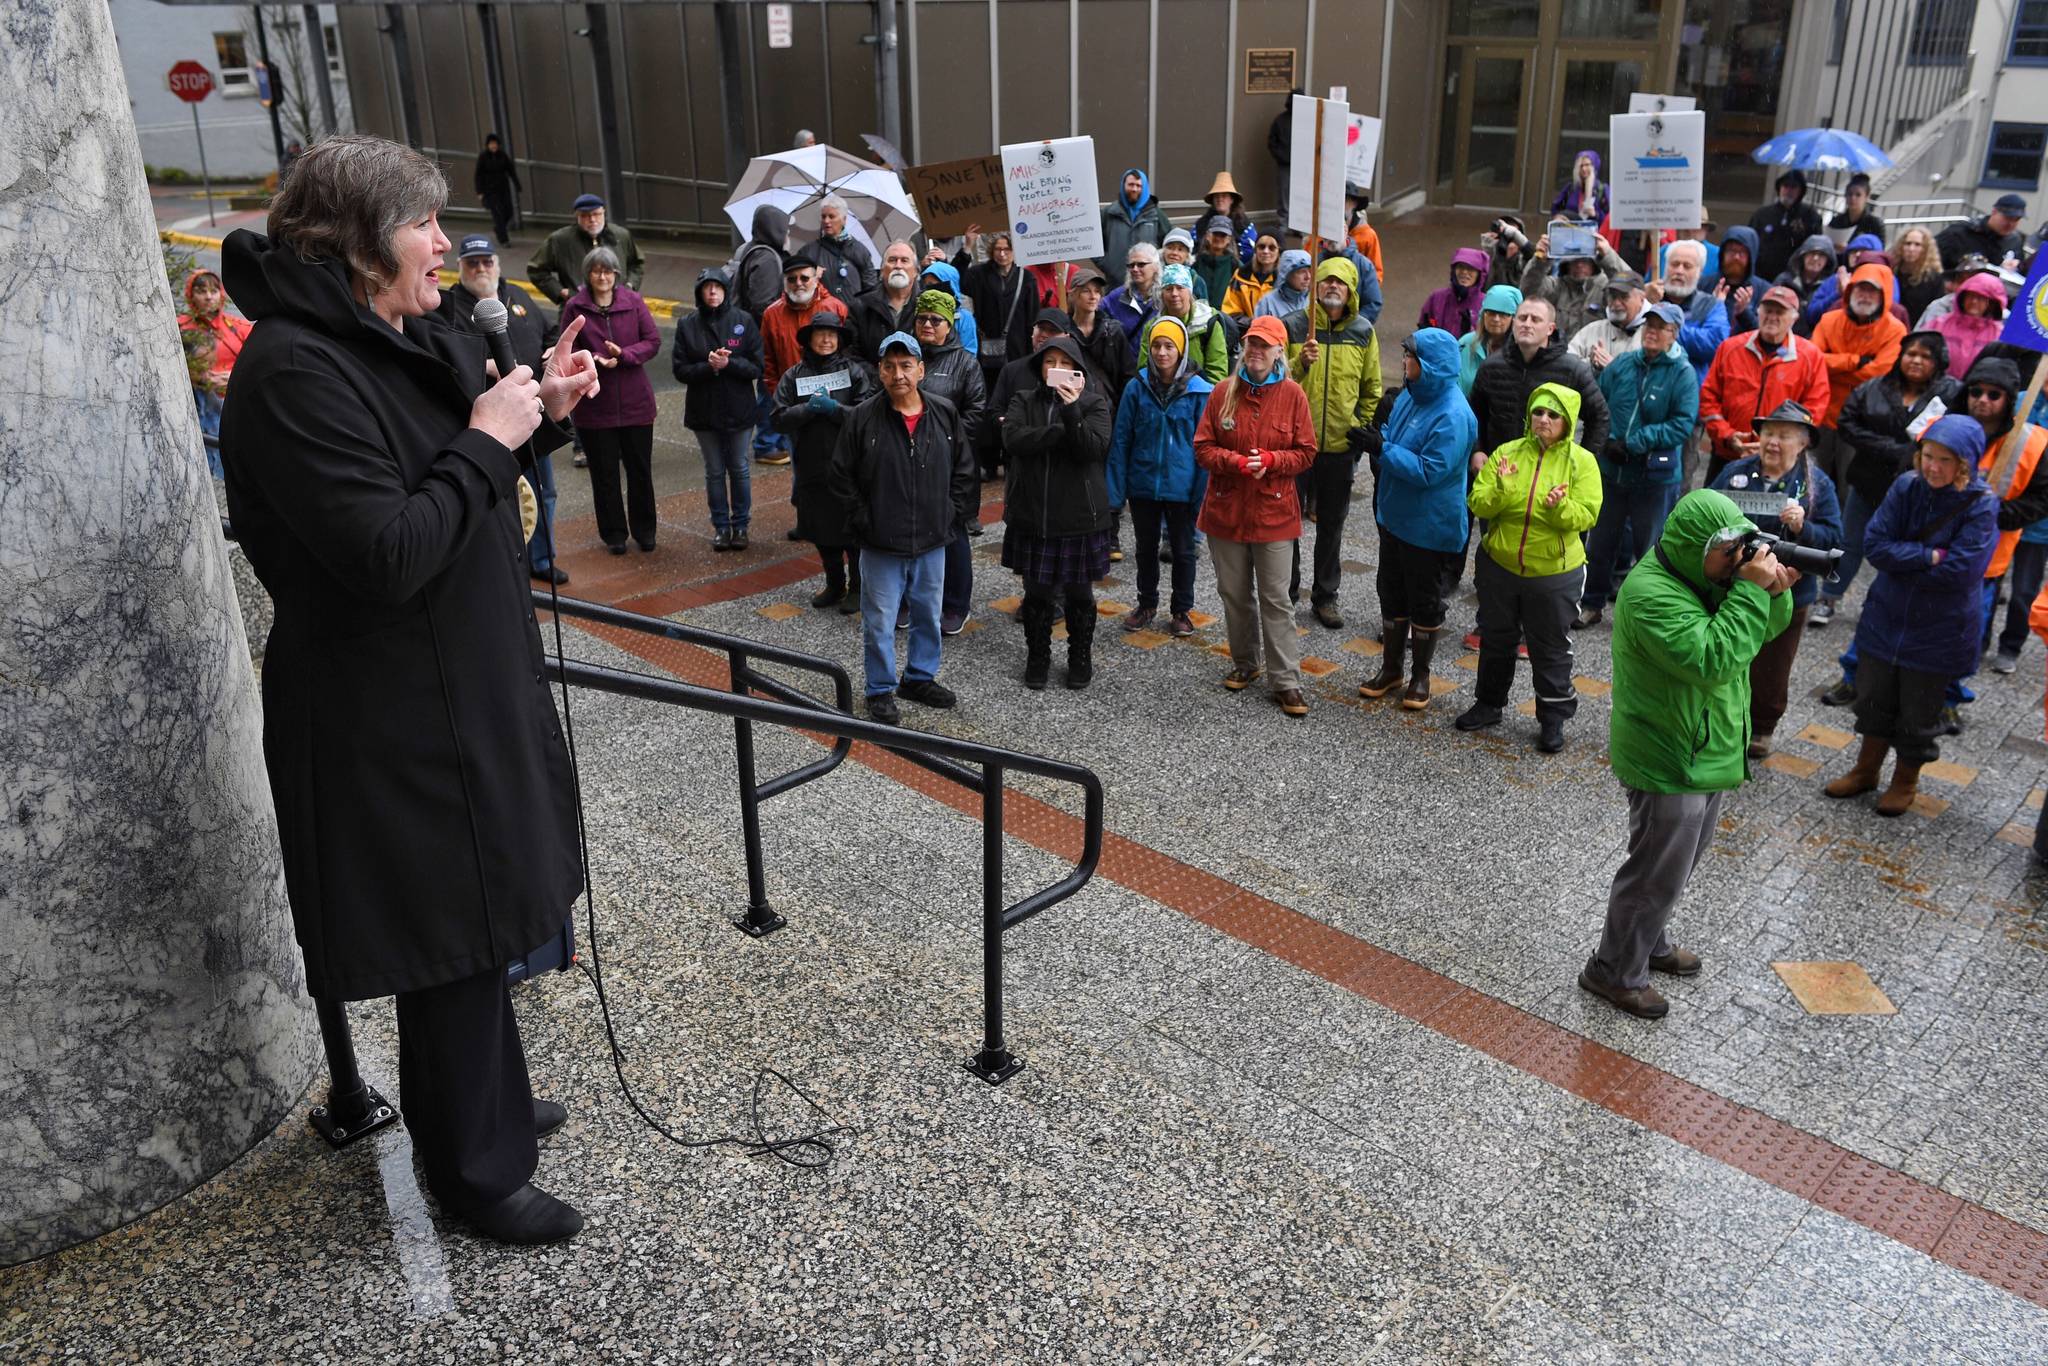 Rep. Sara Hannan, D-Juneau, speaks in favor of the Alaska Marine Highway System during a SOS Rally at the Capitol on Tuesday, May 7, 2019. (Michael Penn | Juneau Empire)